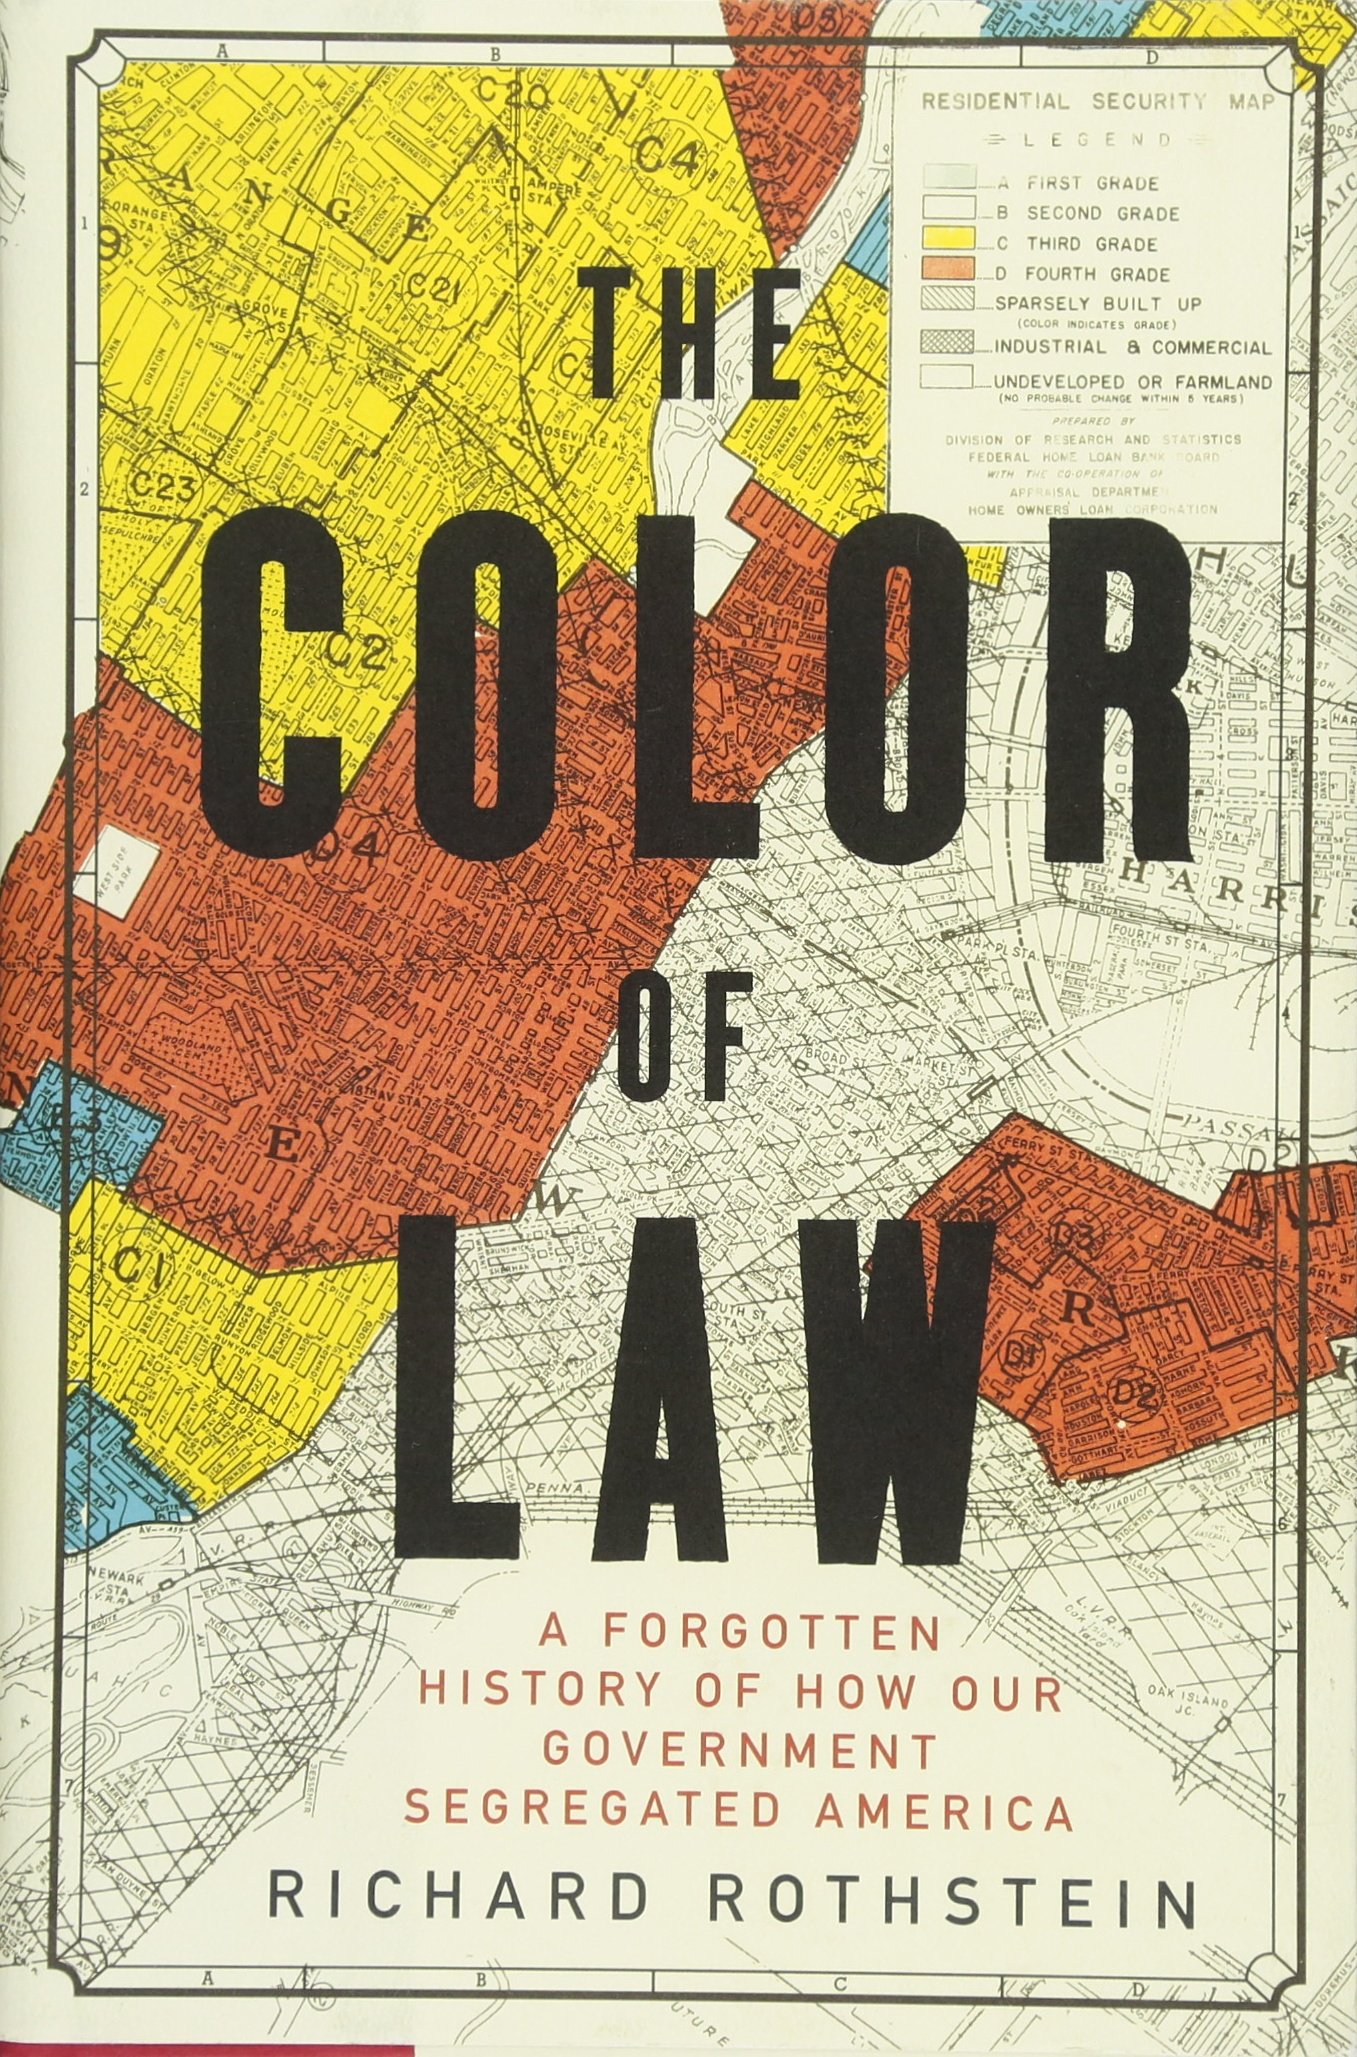 Image of the cover for the book The Color of Law by Richard Rothstein